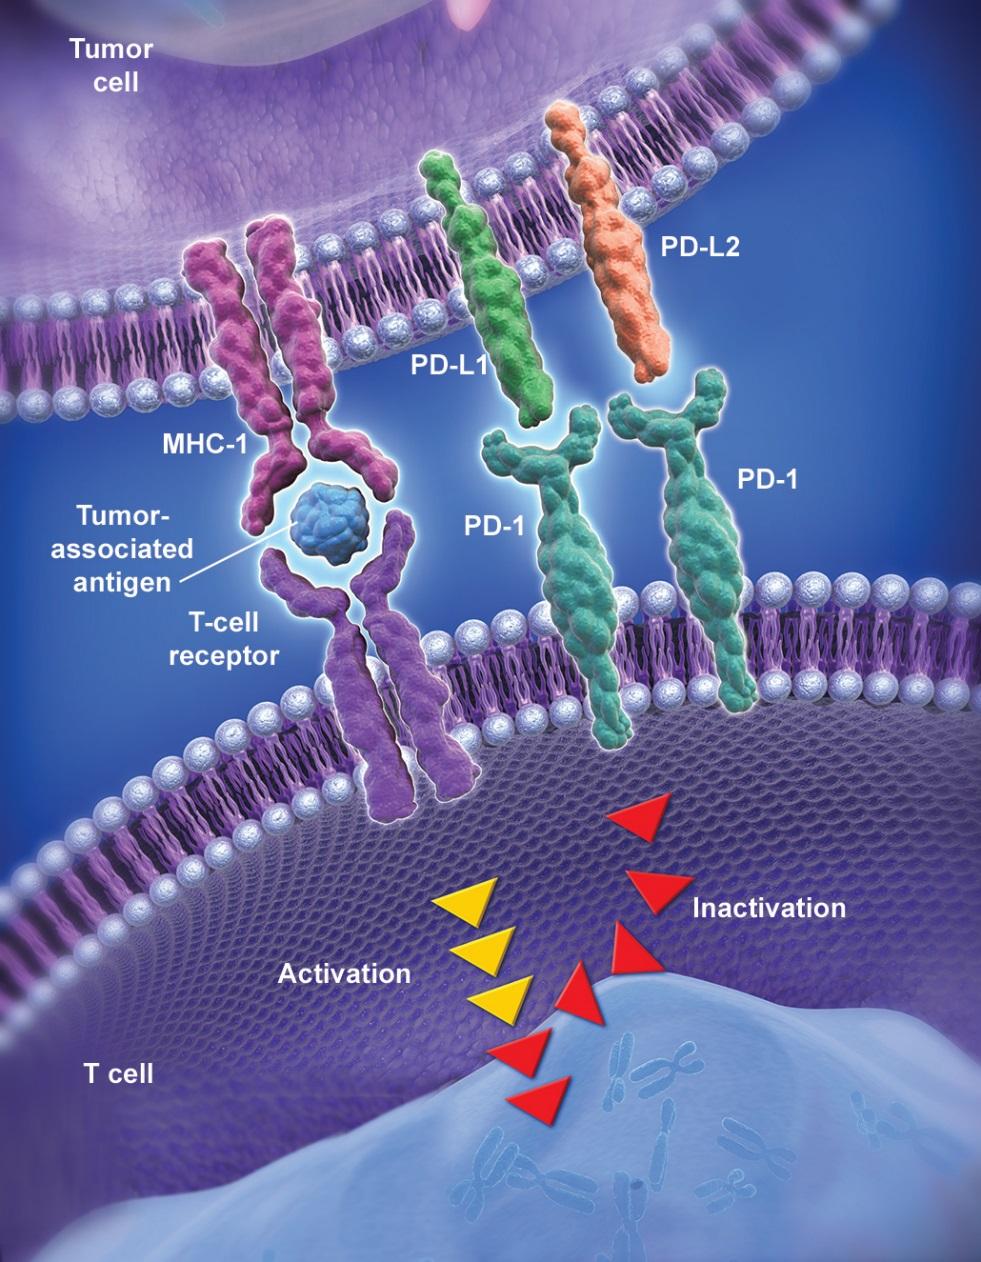 PD-1 and PD-L1/L2 Pathway PD-1 is an immune checkpoint receptor Binding of PD-1 by its